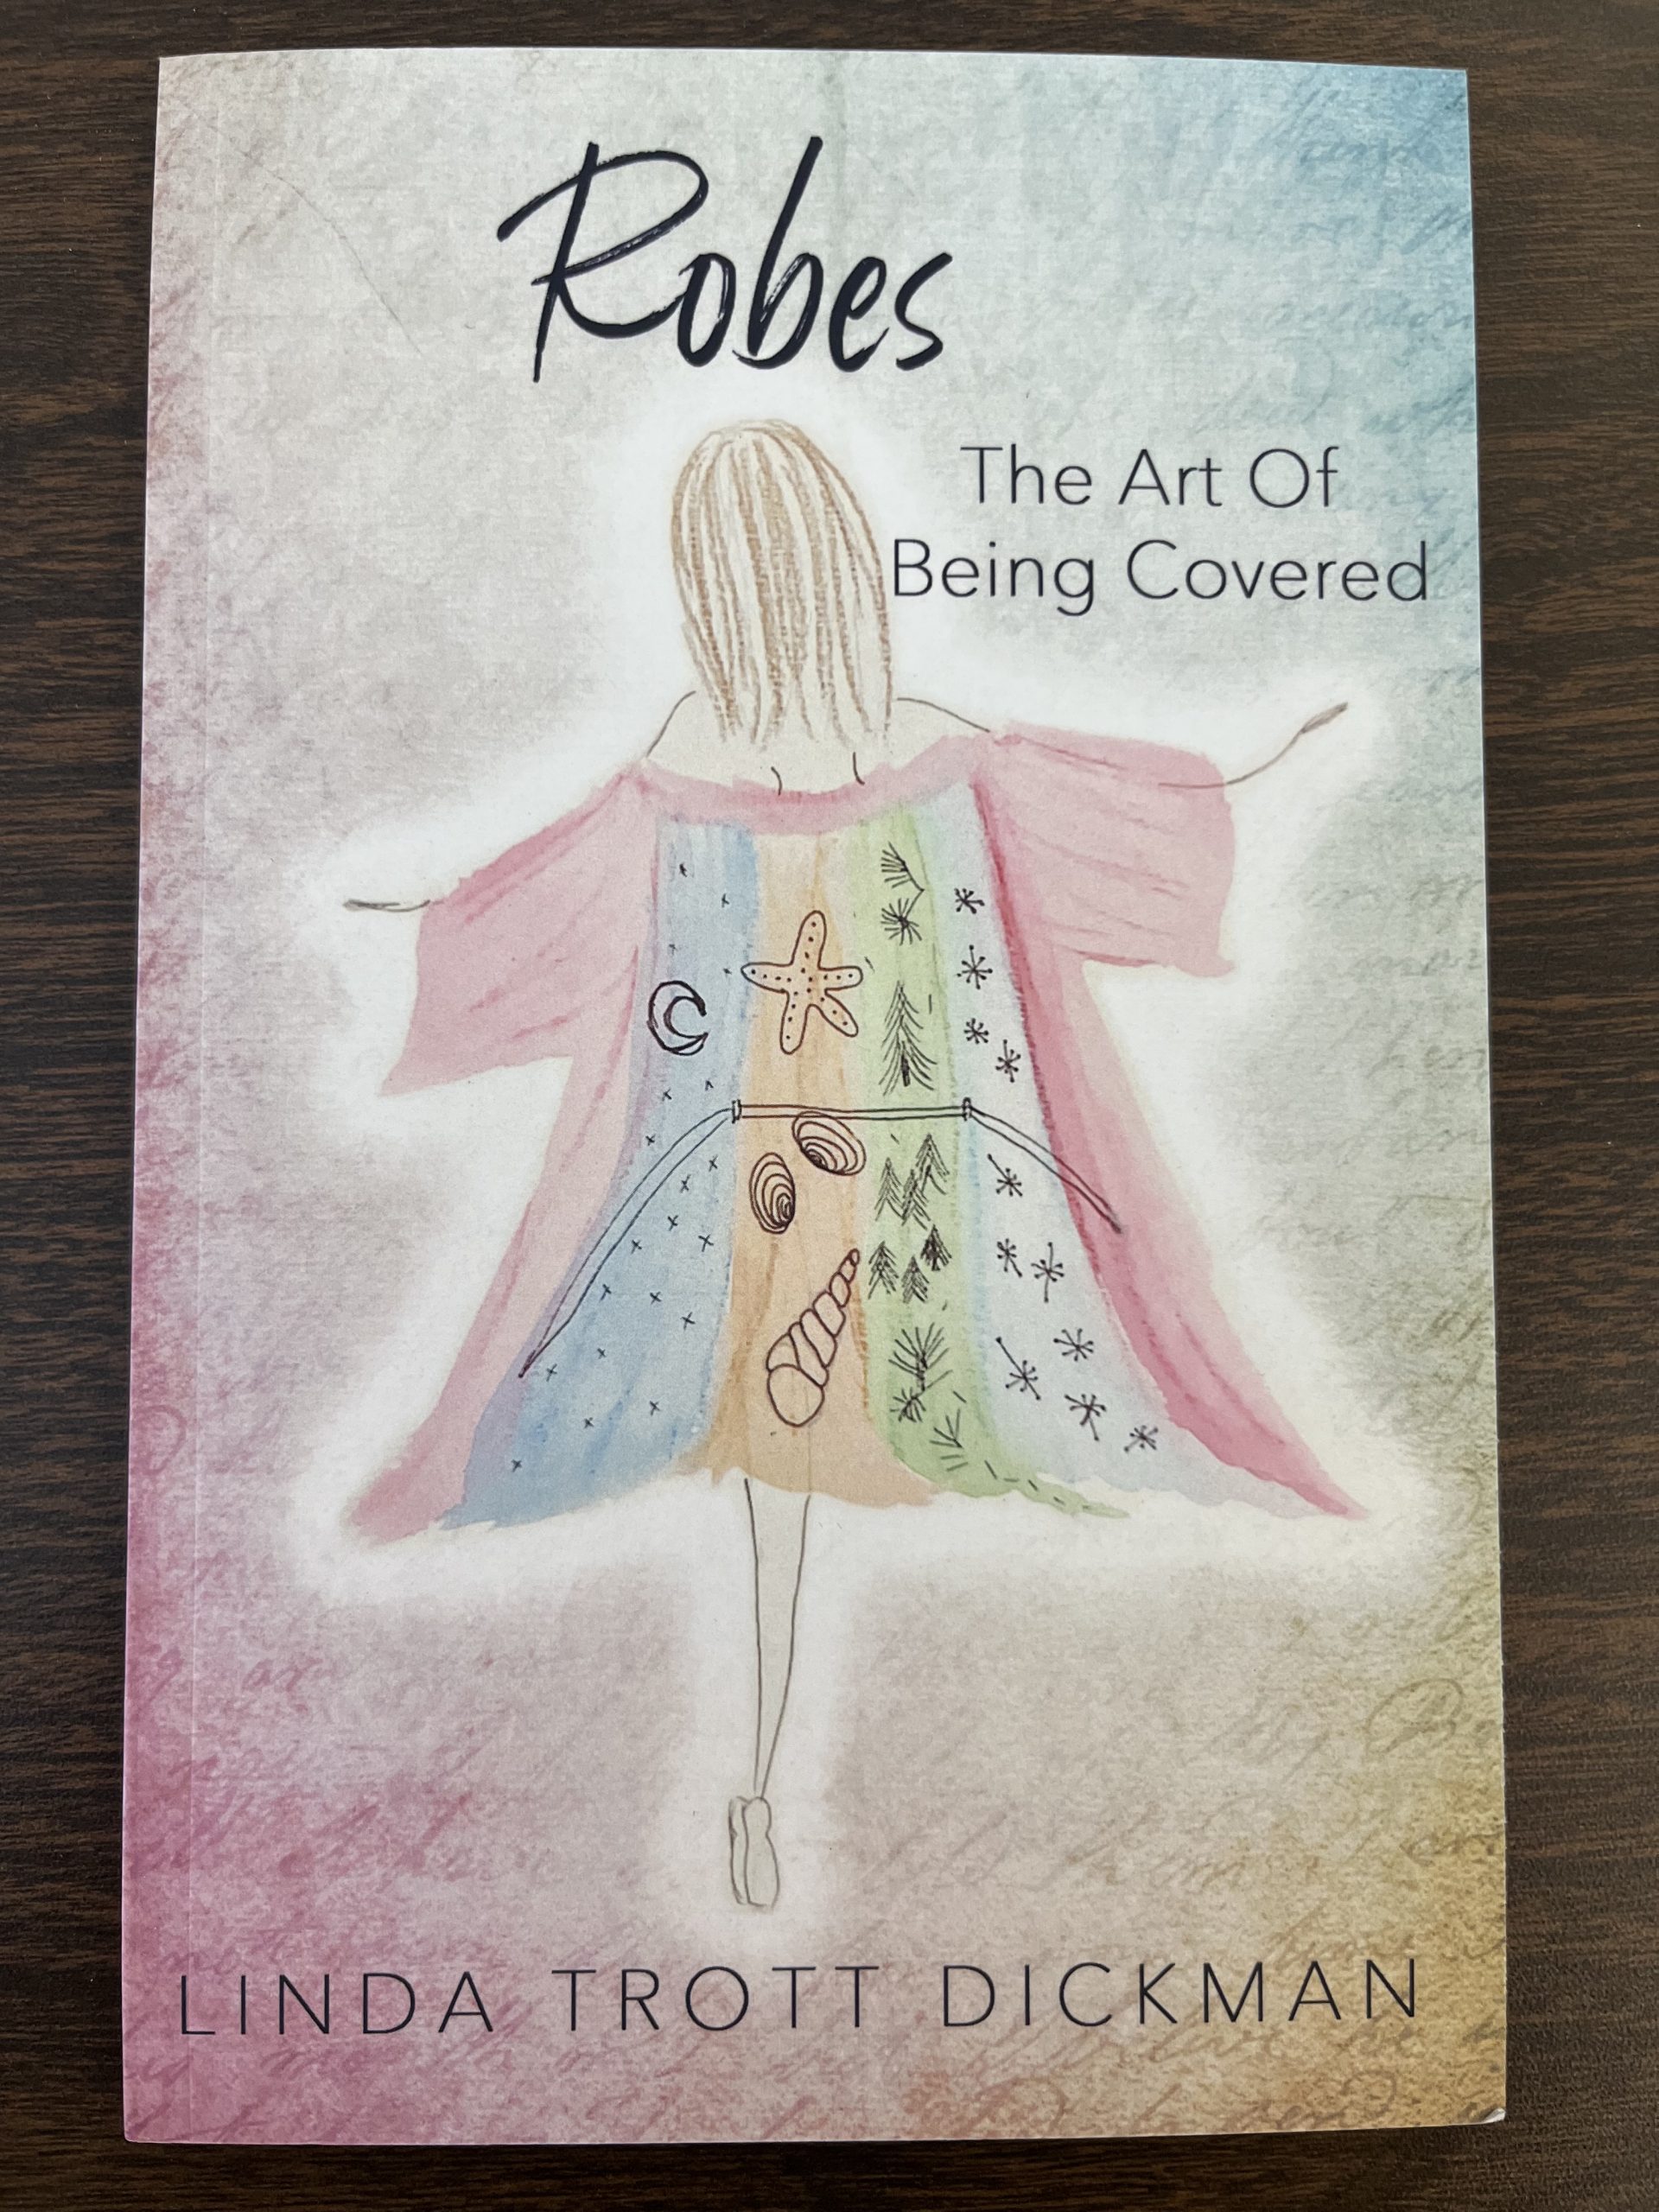 Robes: The Art of Being Covered